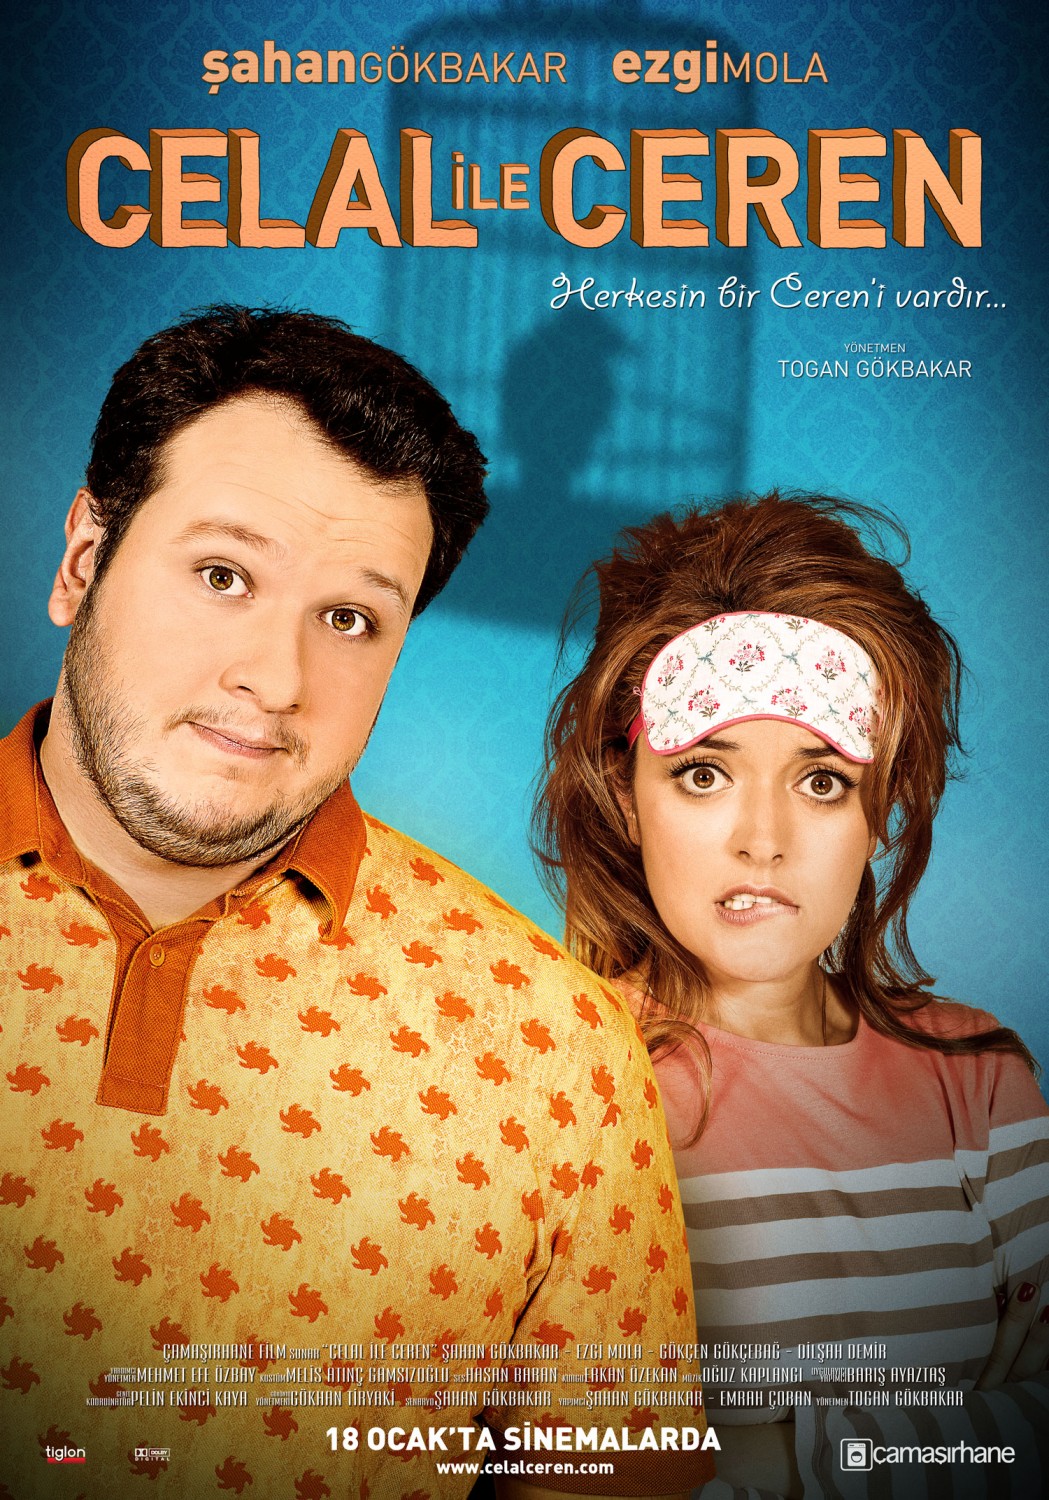 Extra Large Movie Poster Image for Celal ile Ceren 